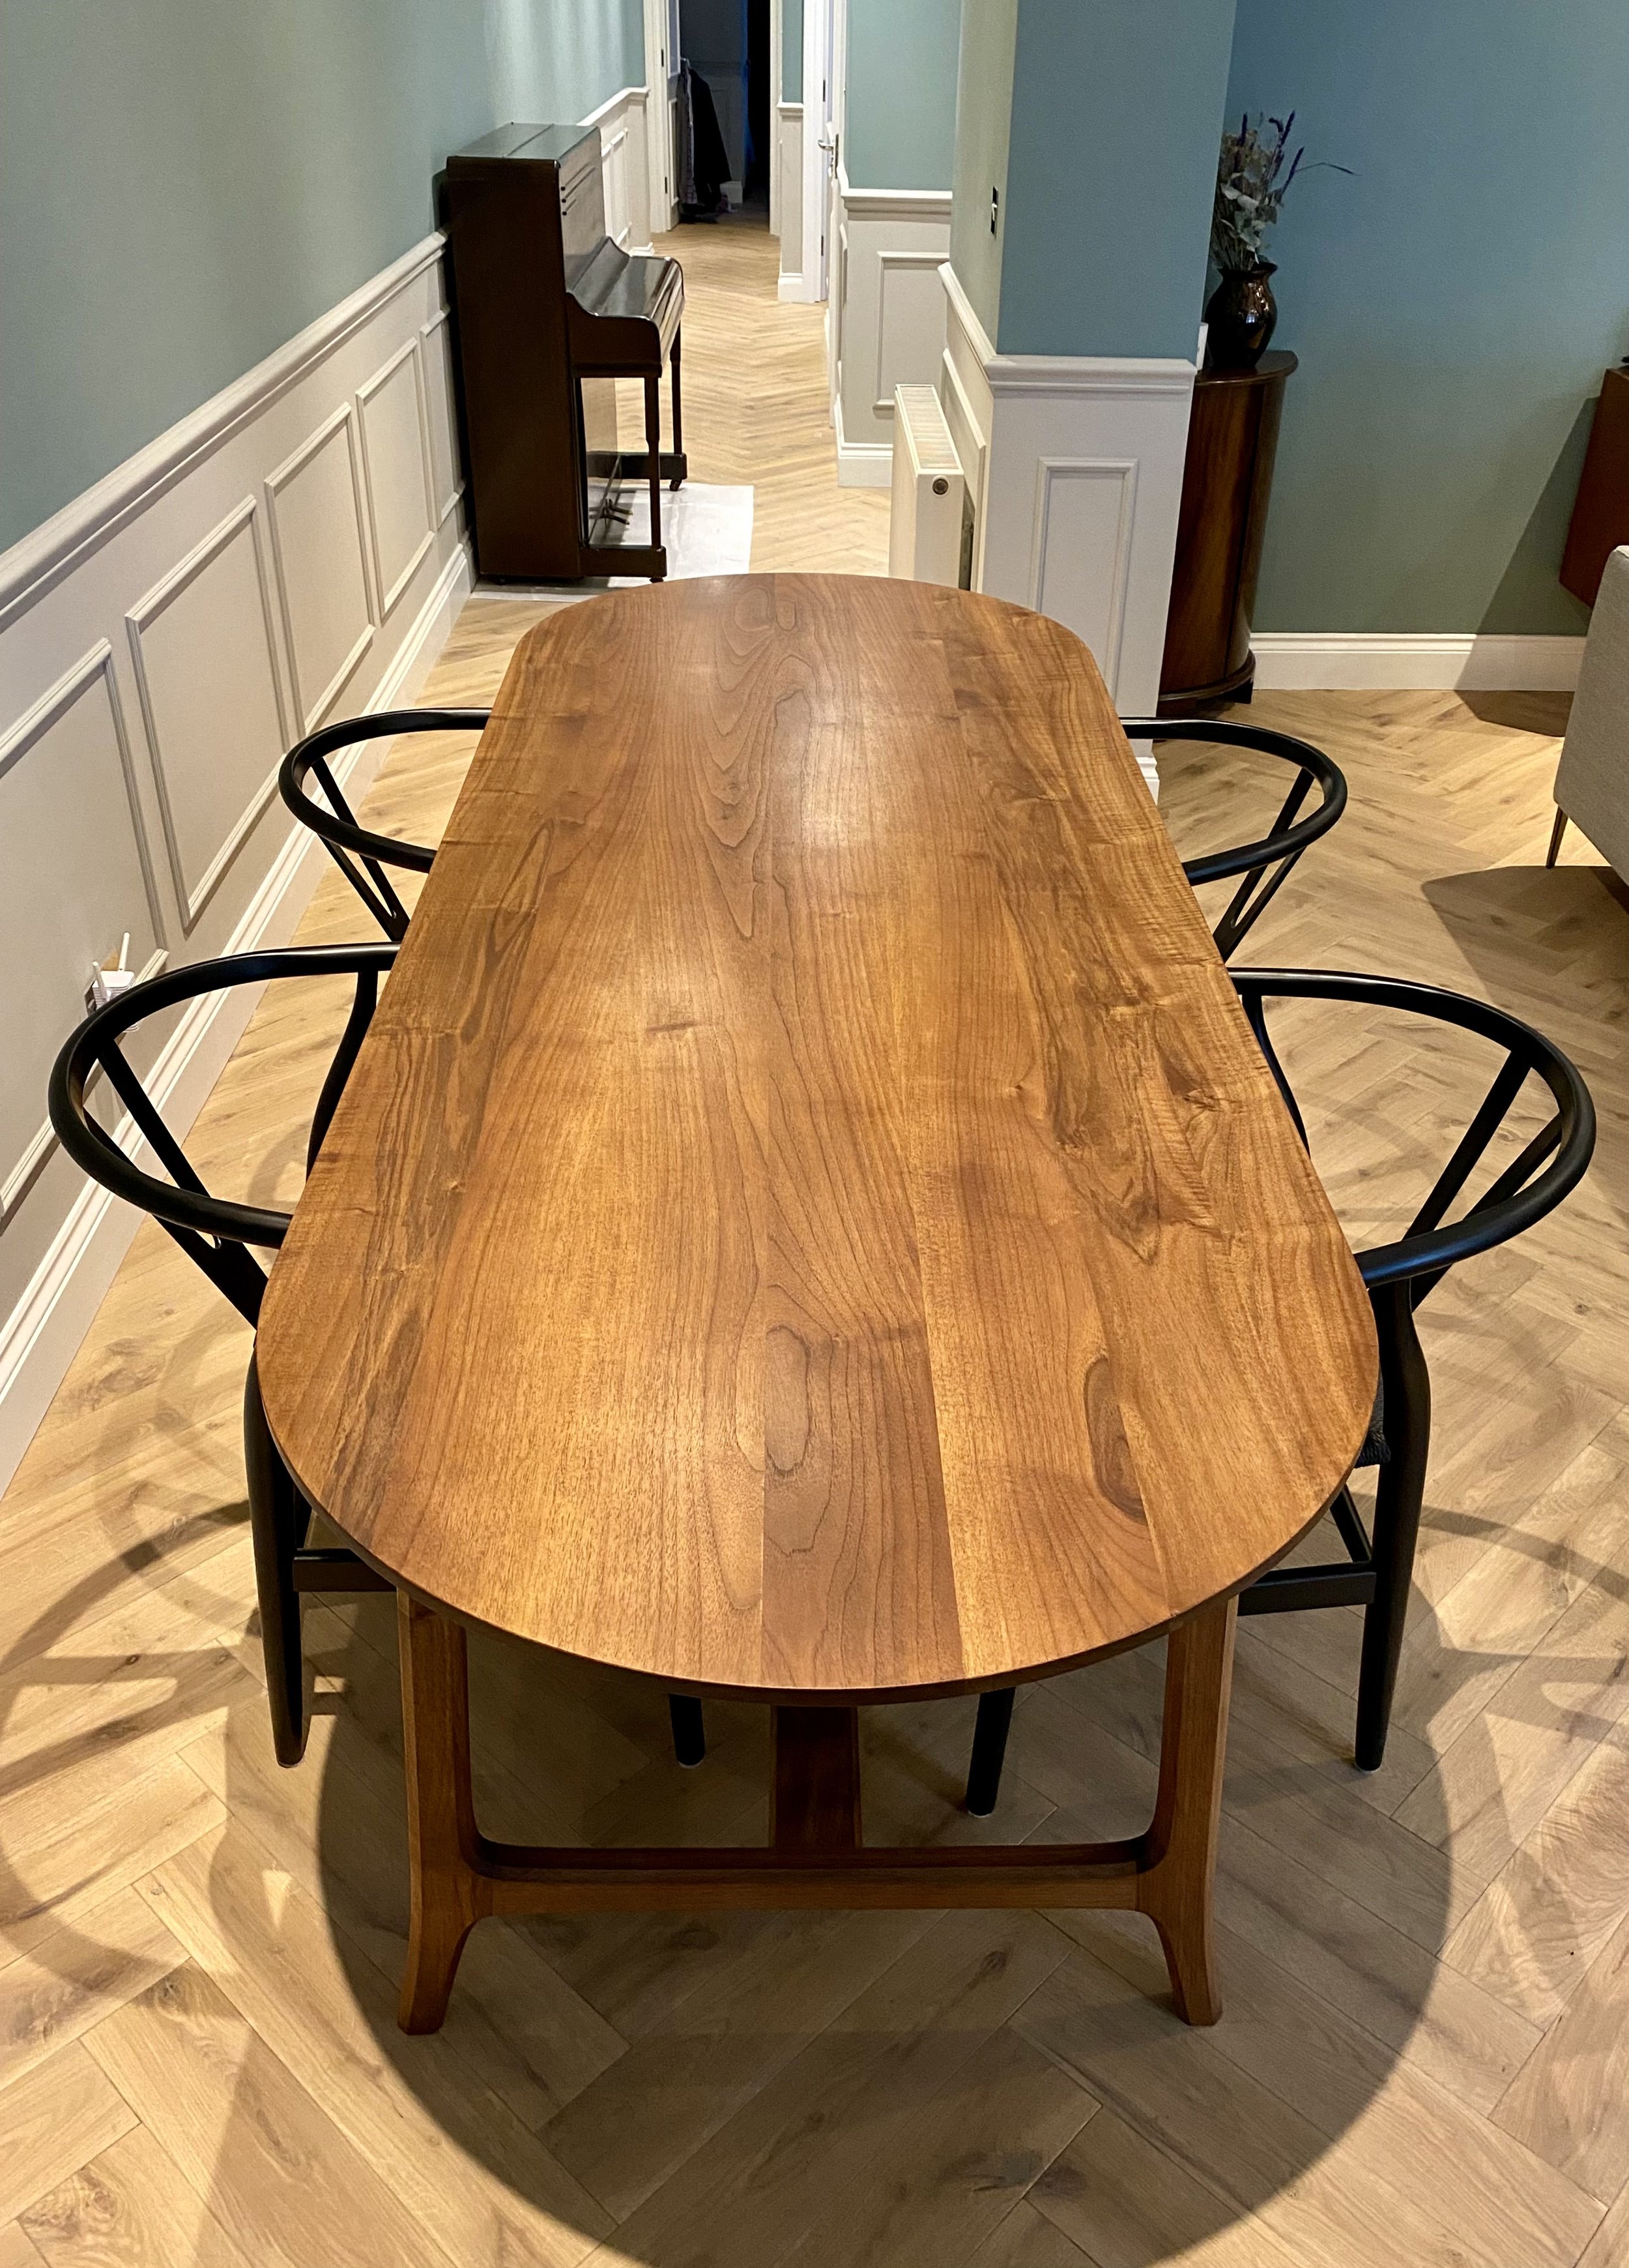 English walnut 8-seater dining table with mid-century inspired frame